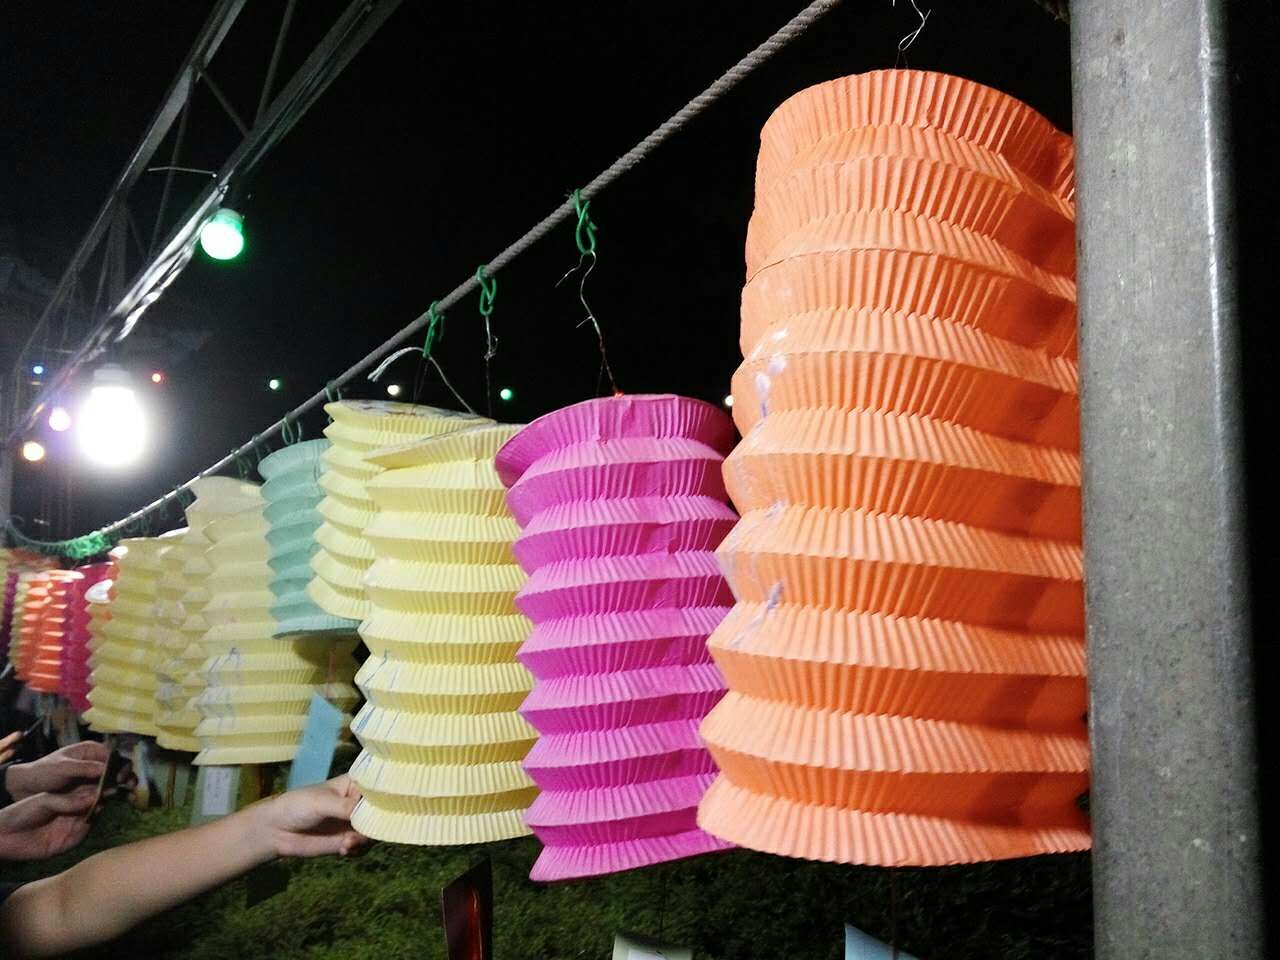 How long does it take to learn Chinese culture? Read through the post and discover China and its culture - Lanterns to celebrate the Mid-Autumn Festival in Singapore. 